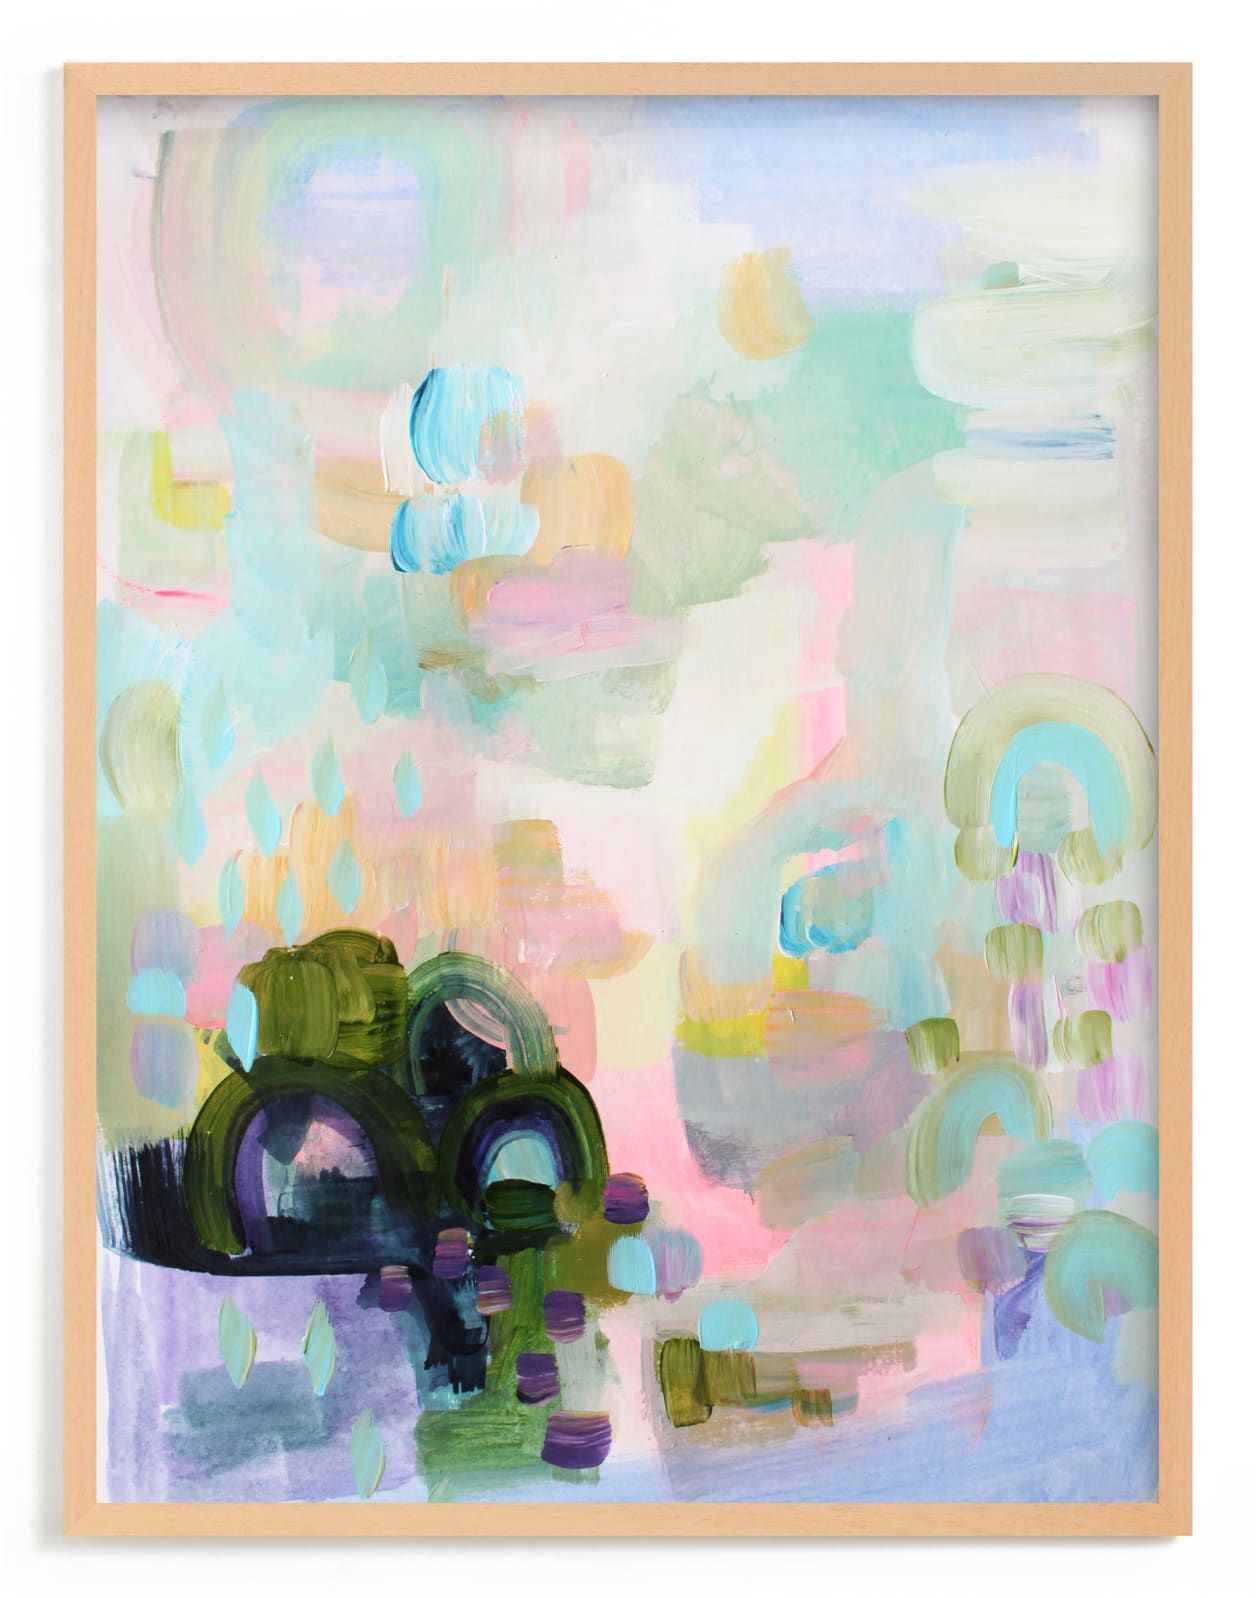 "Let's Play II" - Painting Limited Edition Art Print by Synnöve Seidman. | Minted